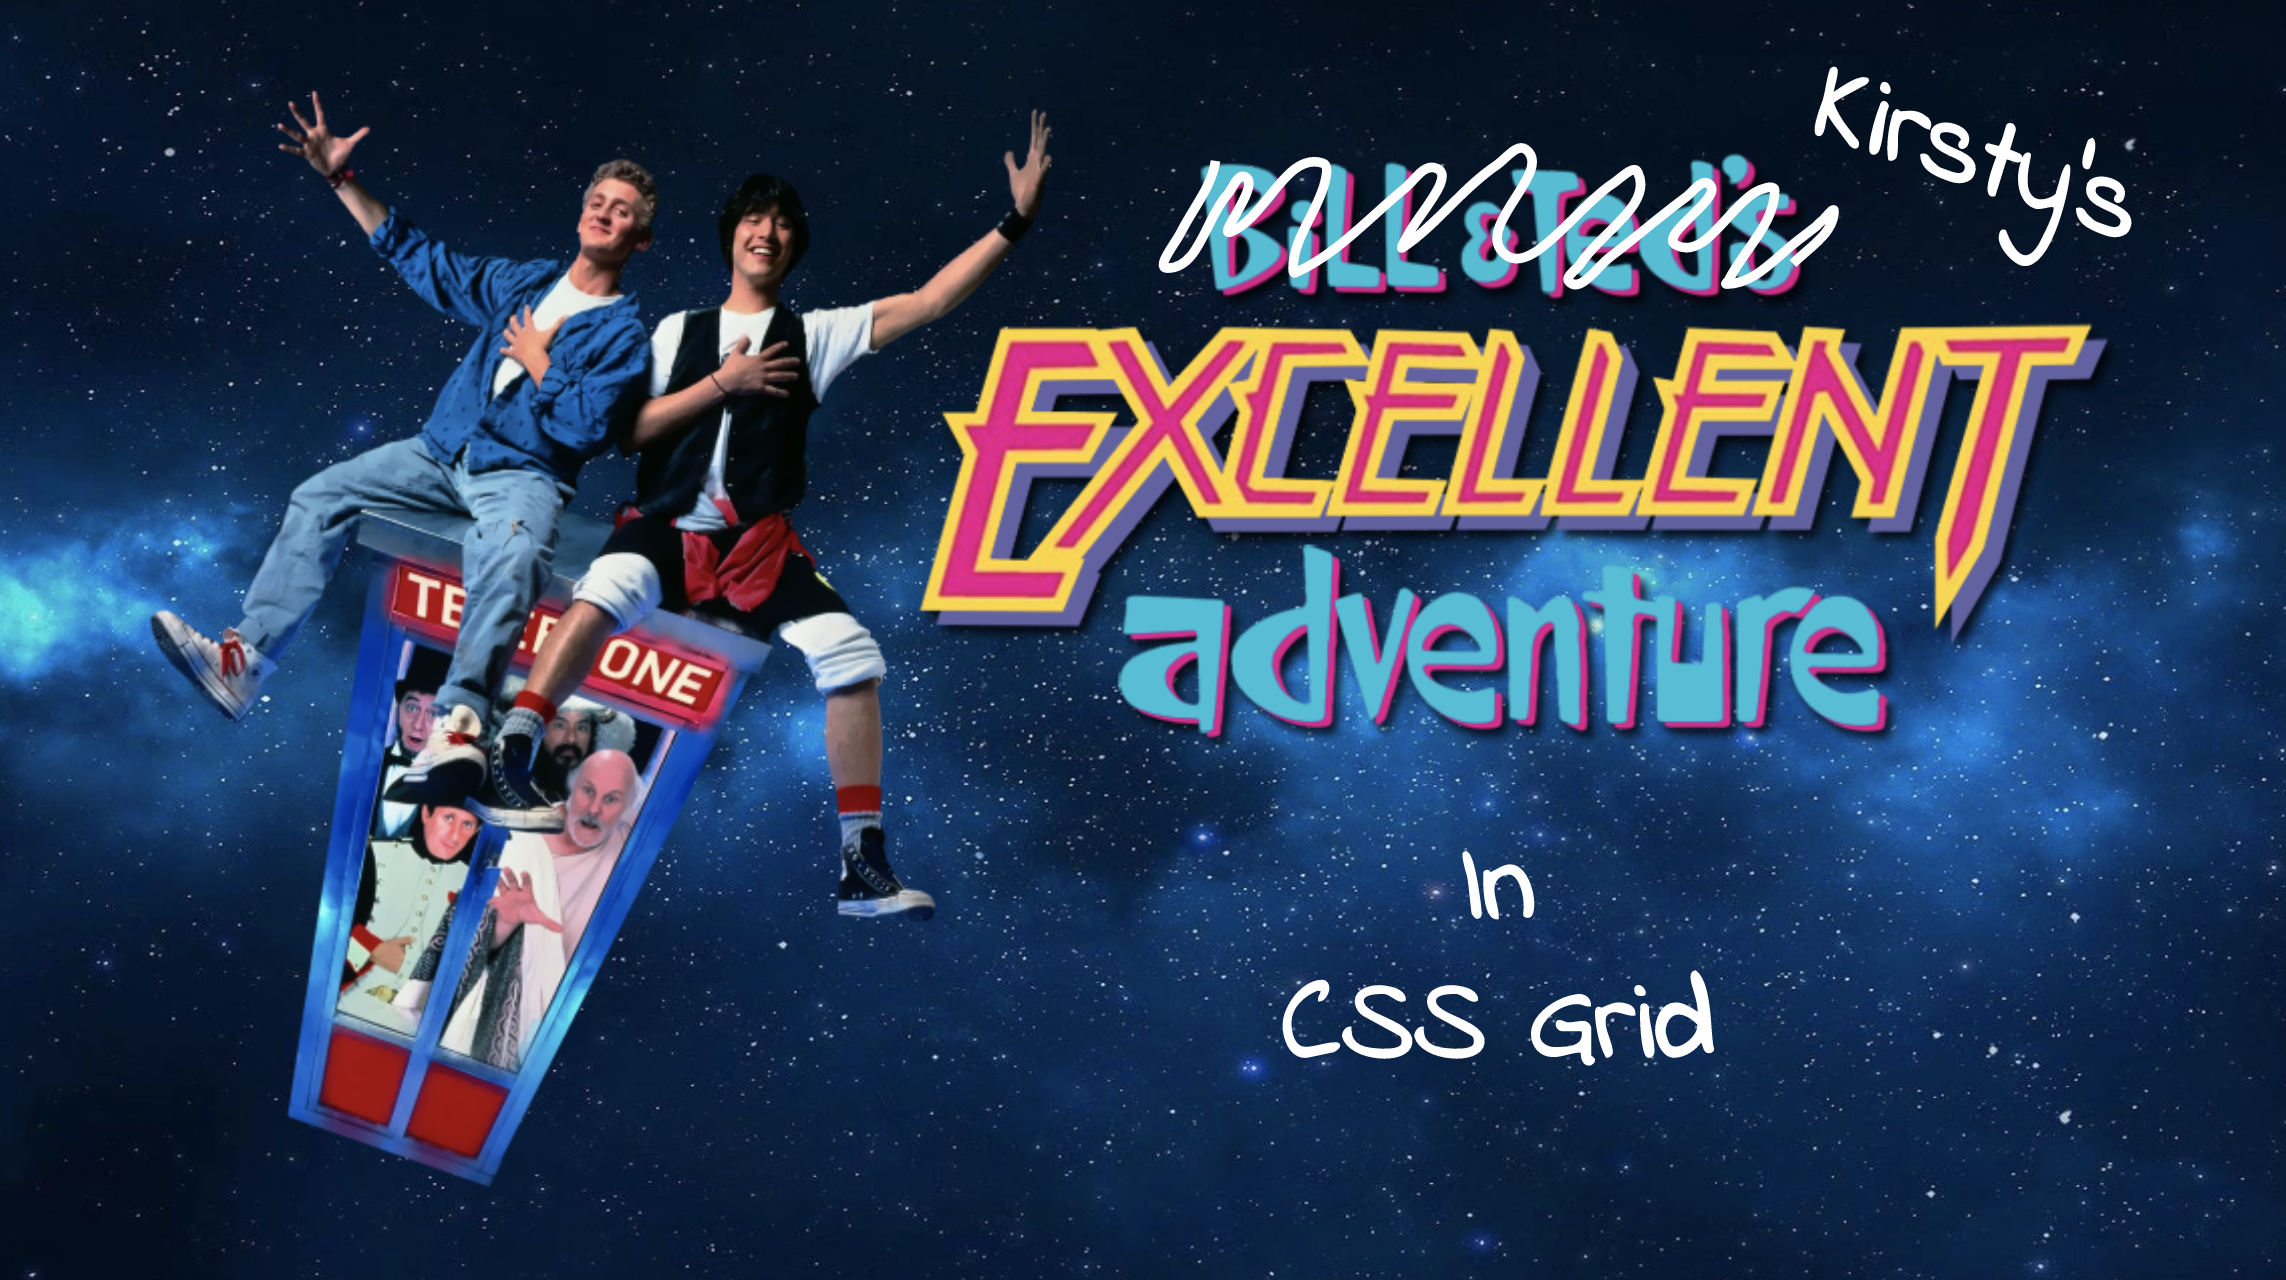 Excellent Adventures in CSS Grid – ON TOUR!